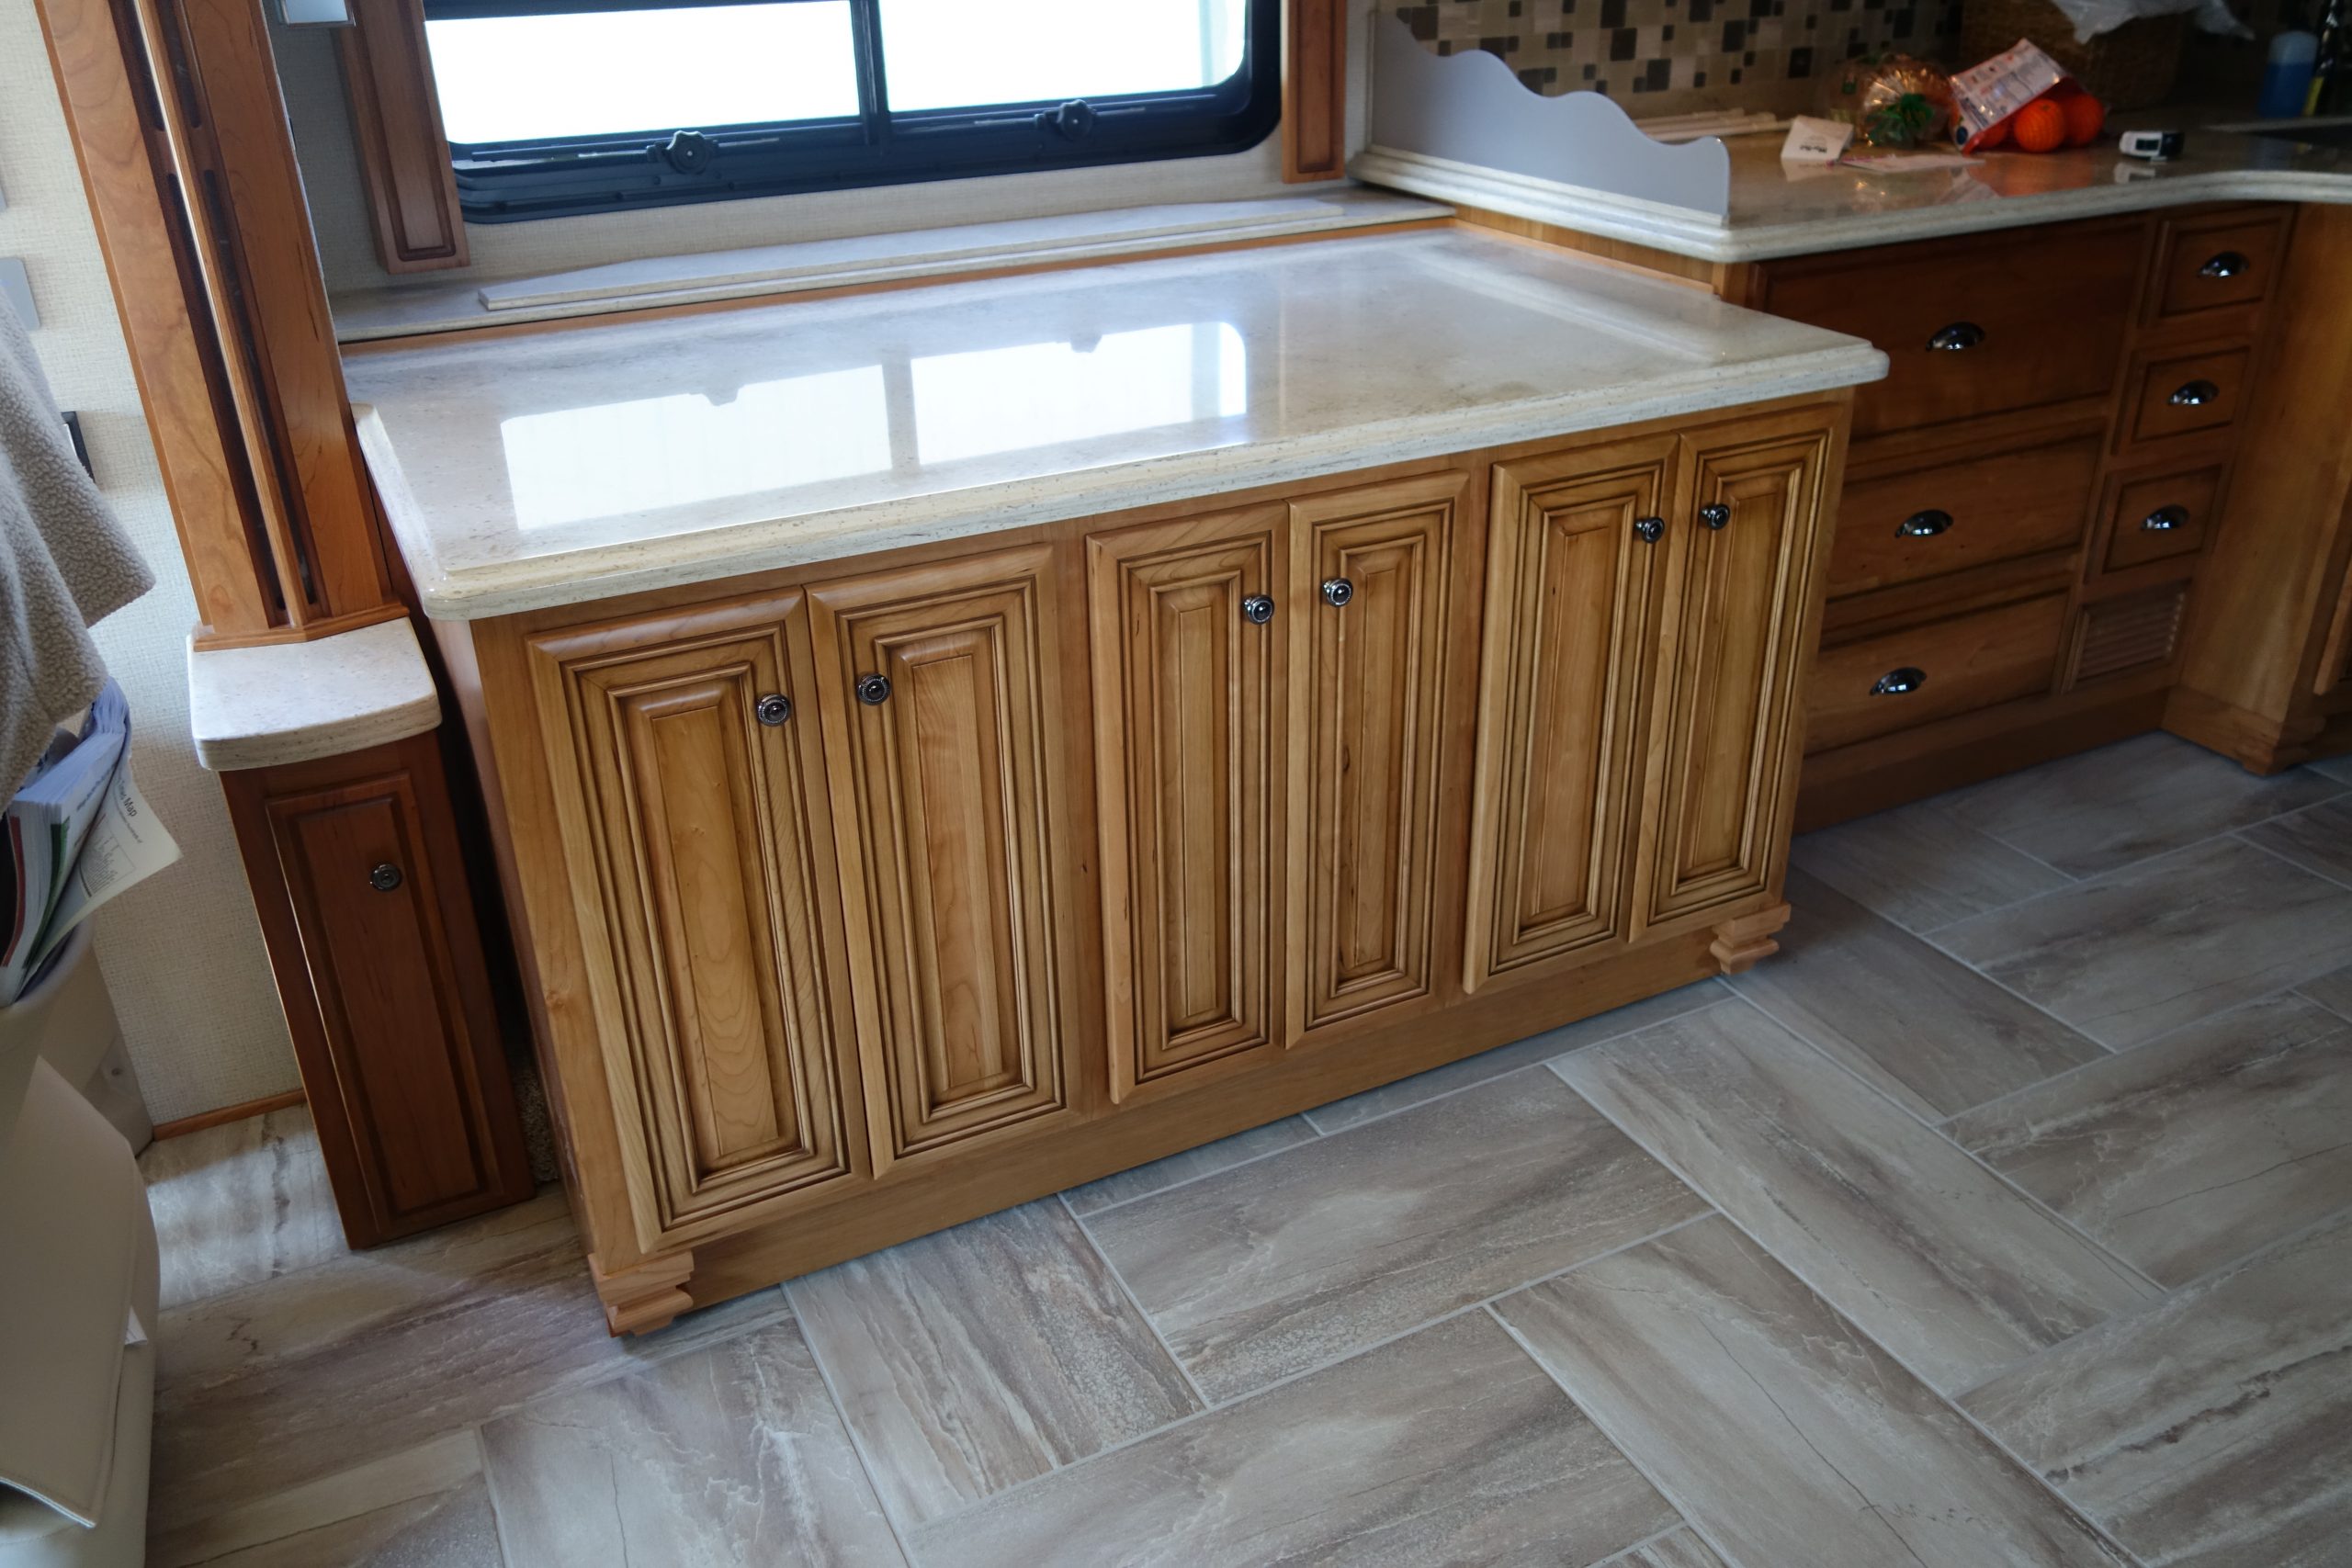 Custom cabinets with countertop